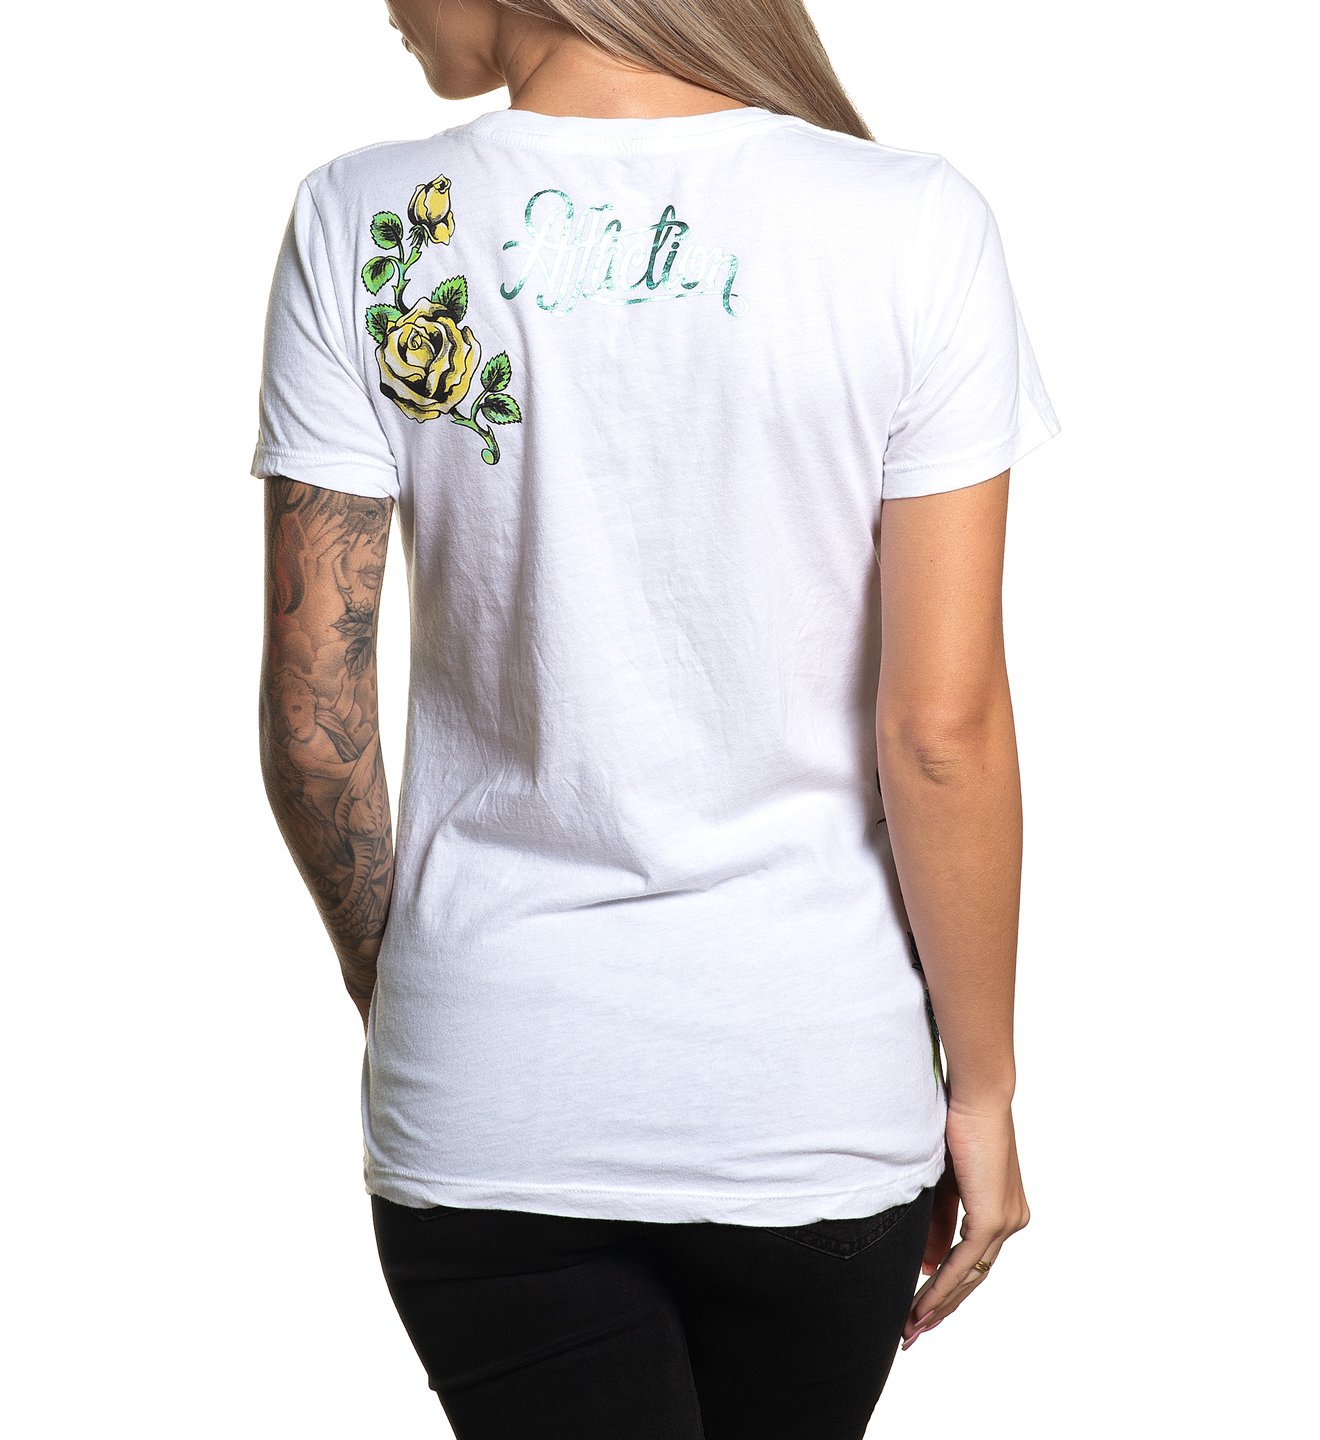 Life Sparrow - Womens Short Sleeve Tees - Affliction Clothing